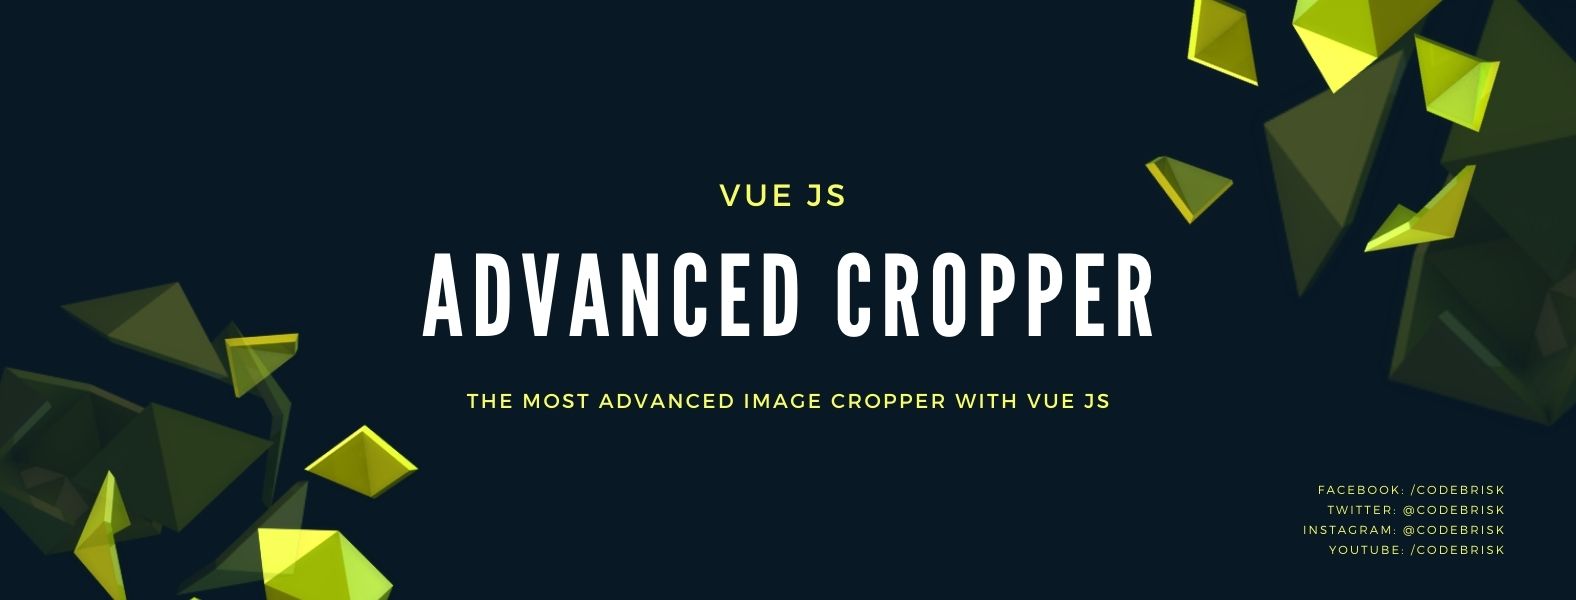 The Most Advanced Image Cropper With Vue Js cover image